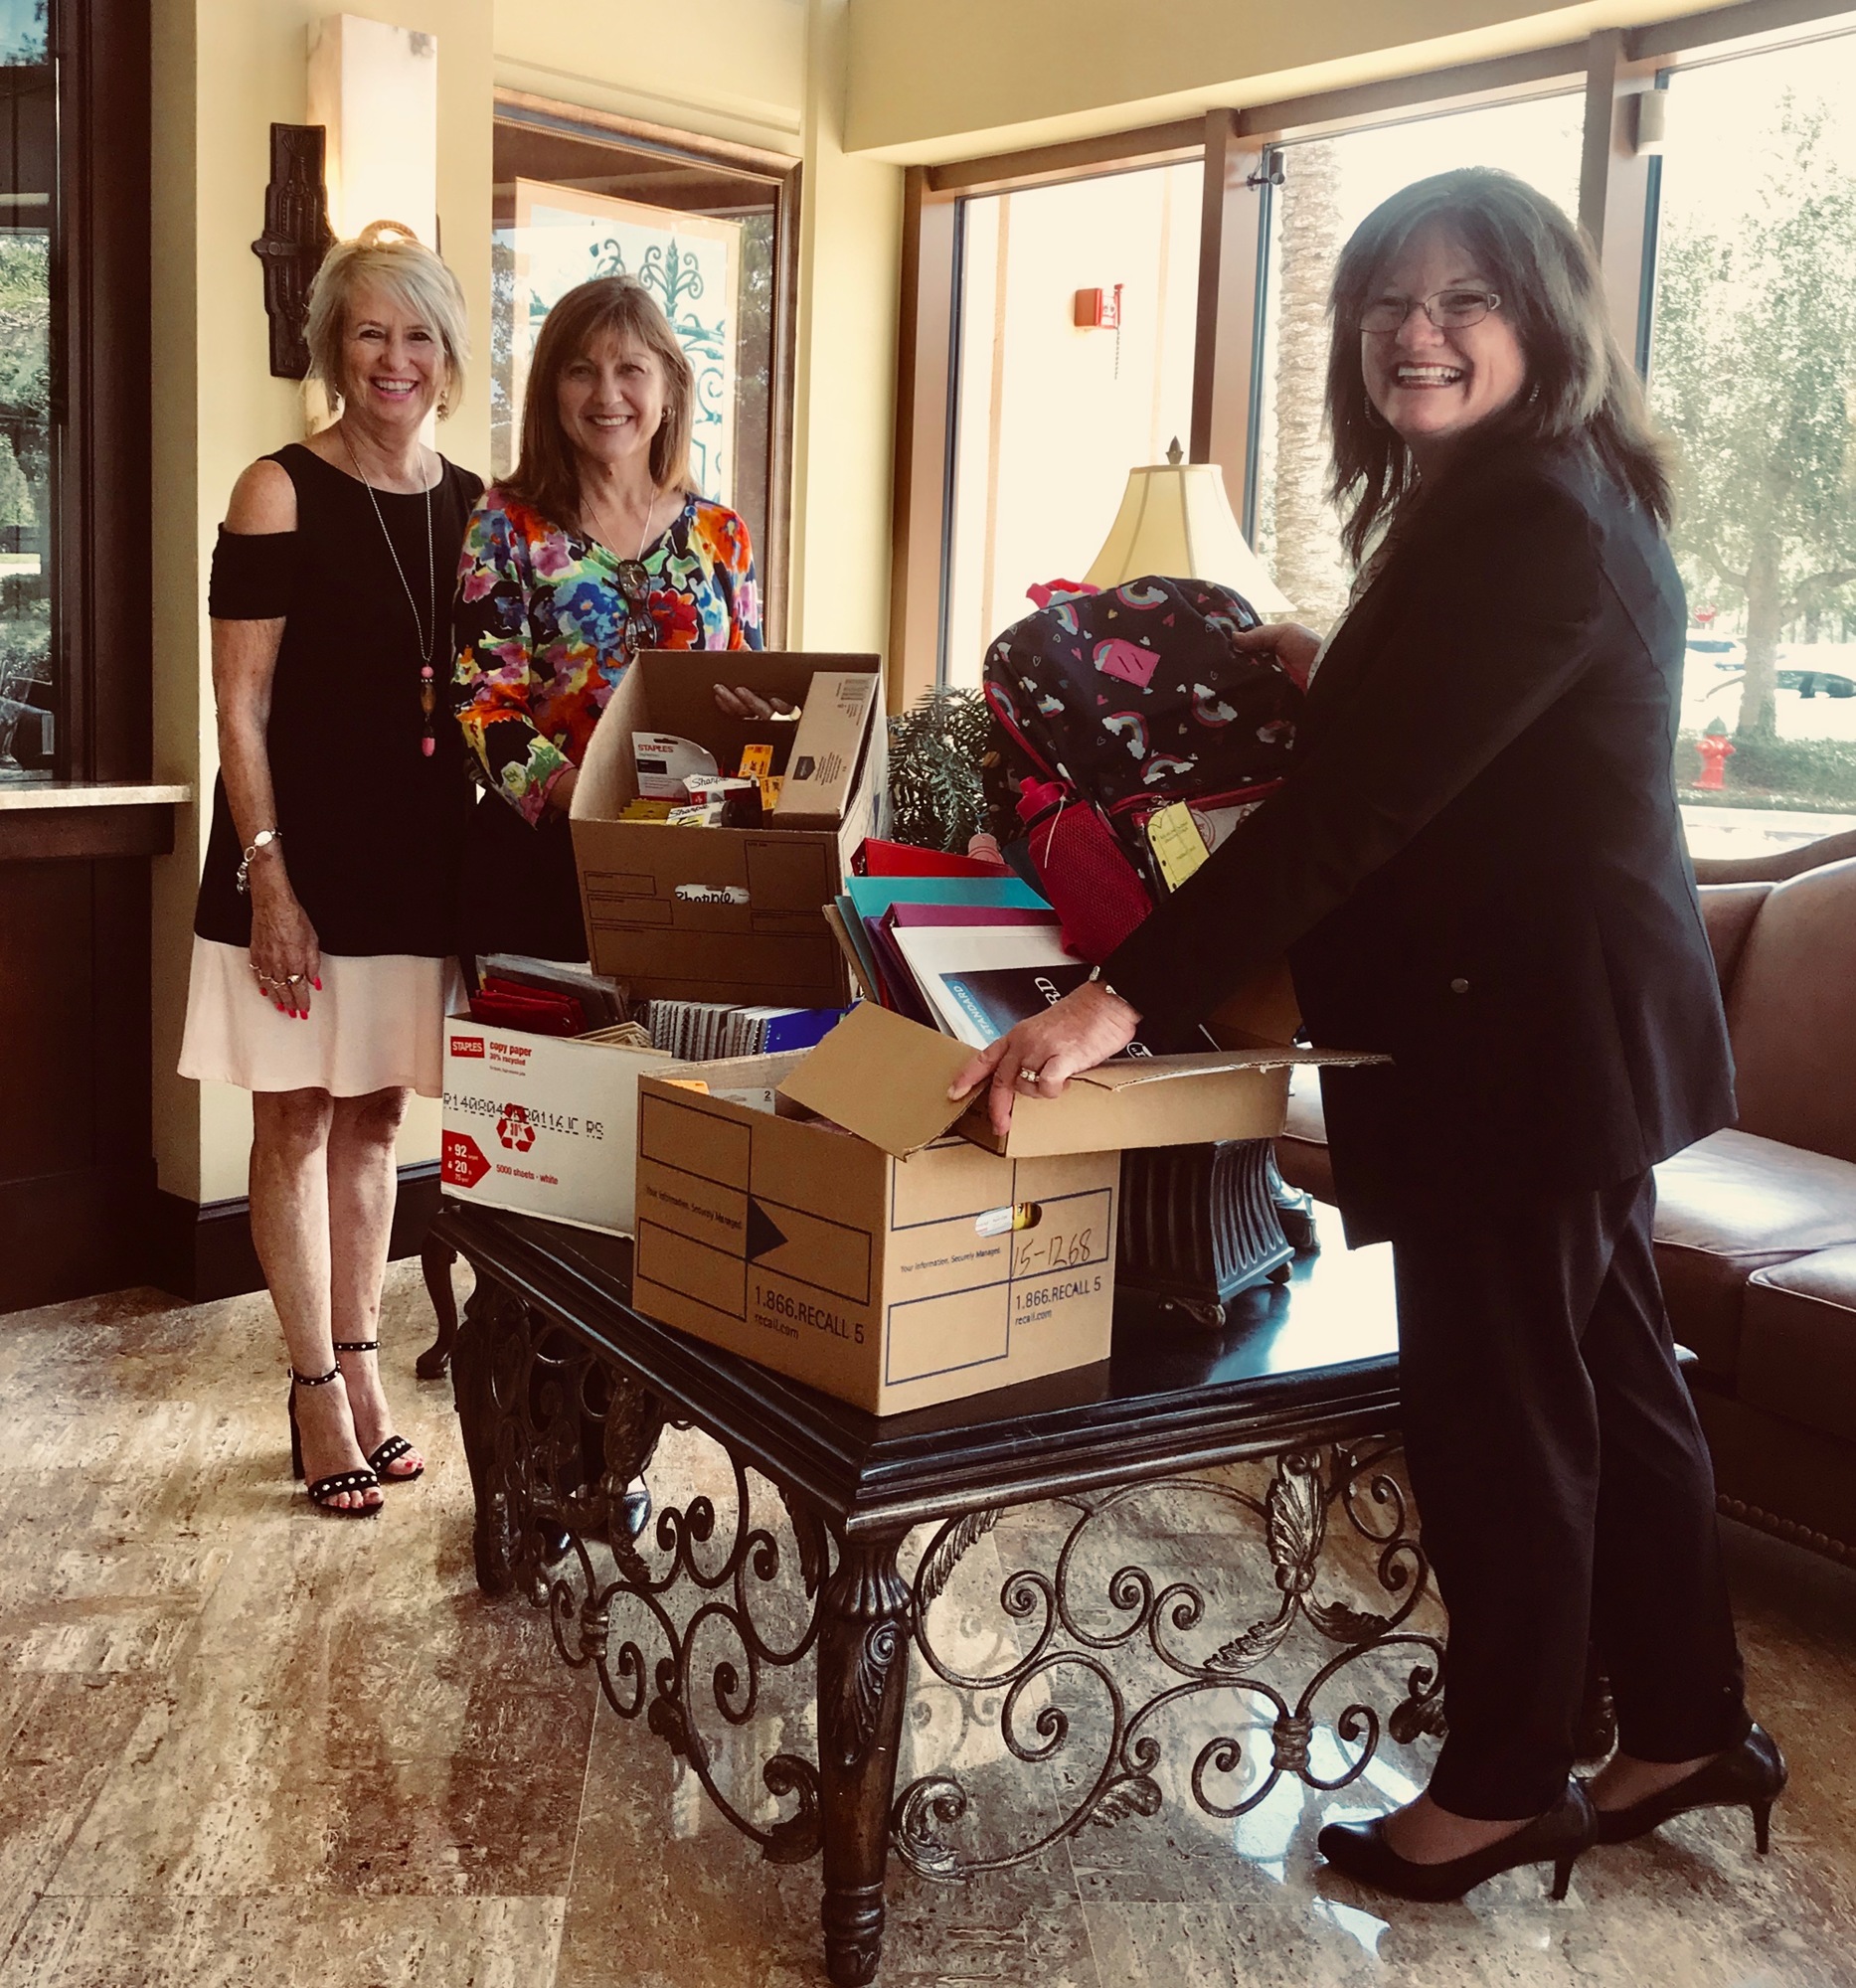 Food Brings Hope Executive Director Judi Winch, Market President Support office’s Maritza Armijos and Senior Vice President and Market Manager Karen Jacob with the school supplies Bank of America donated. Photo courtesy of FBH